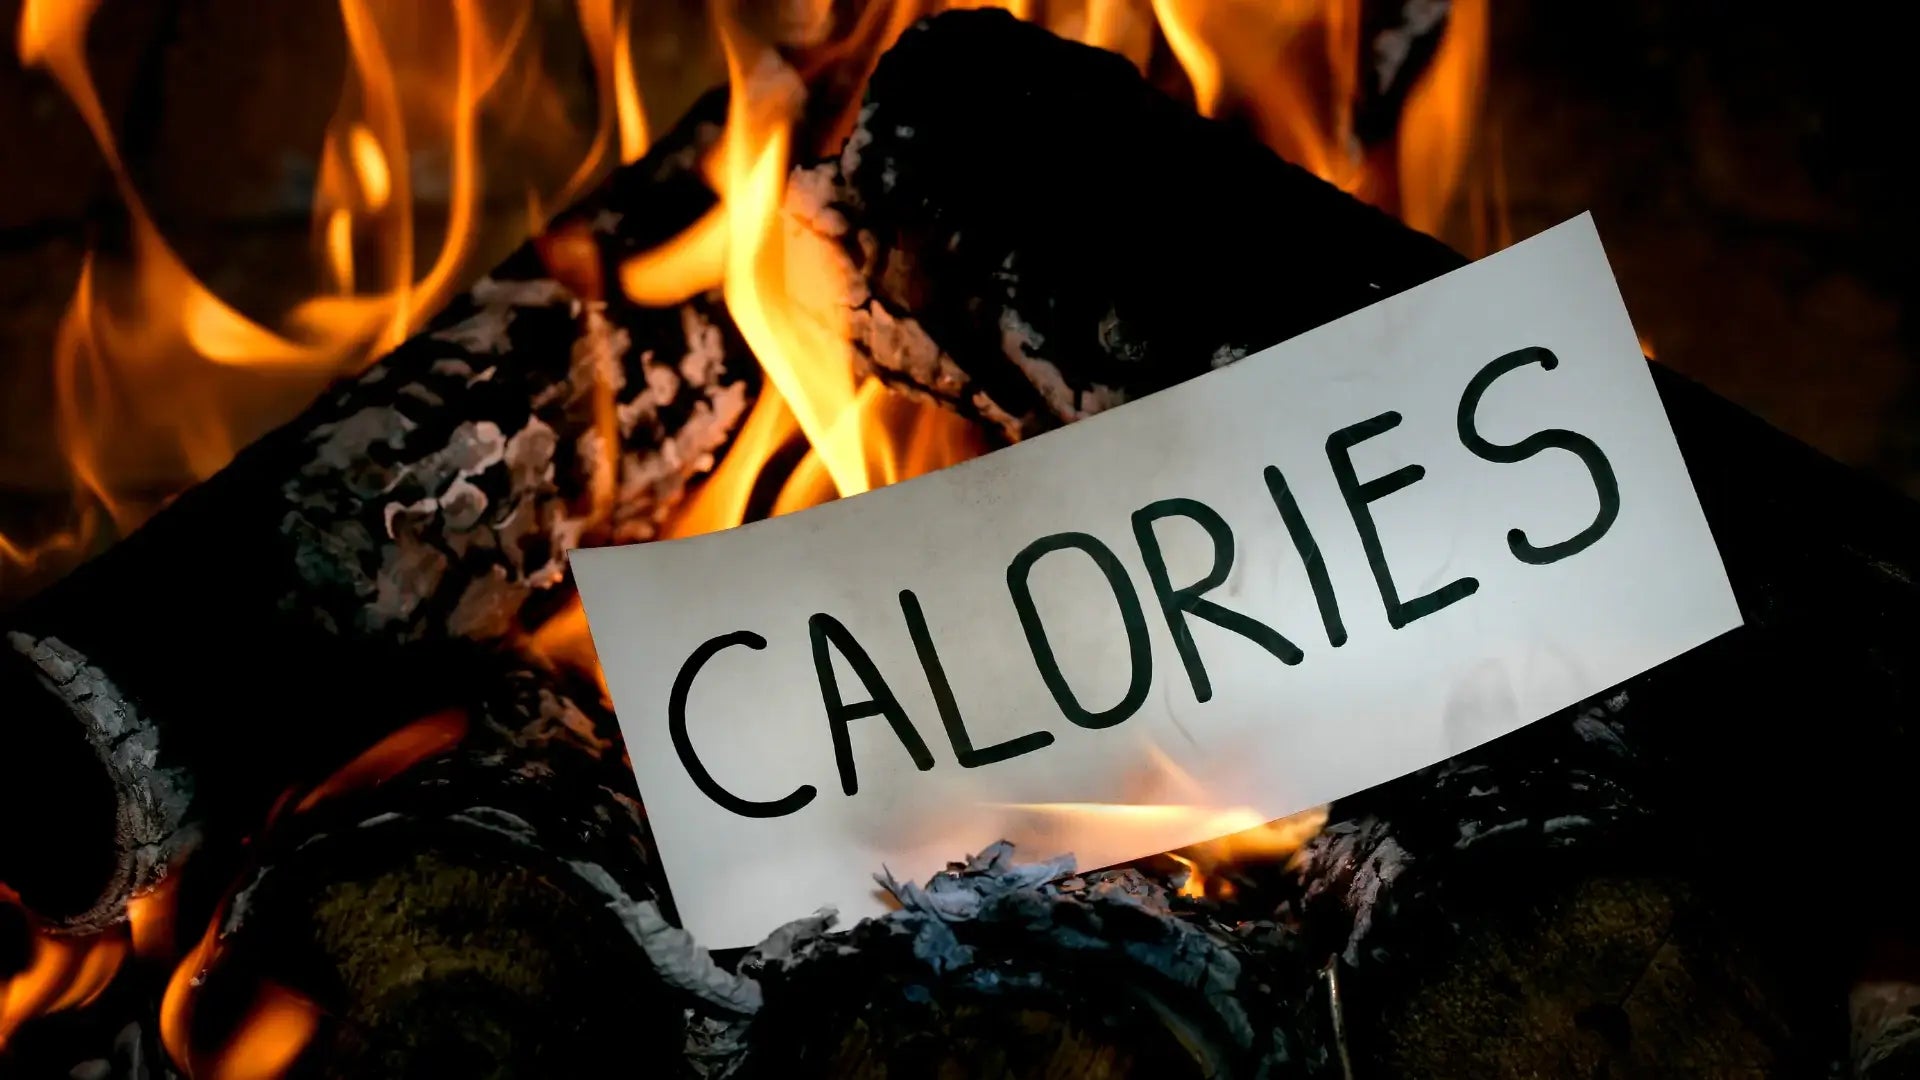 Minimum Calories to Survive: How Many Calories Do I Need to Survive?